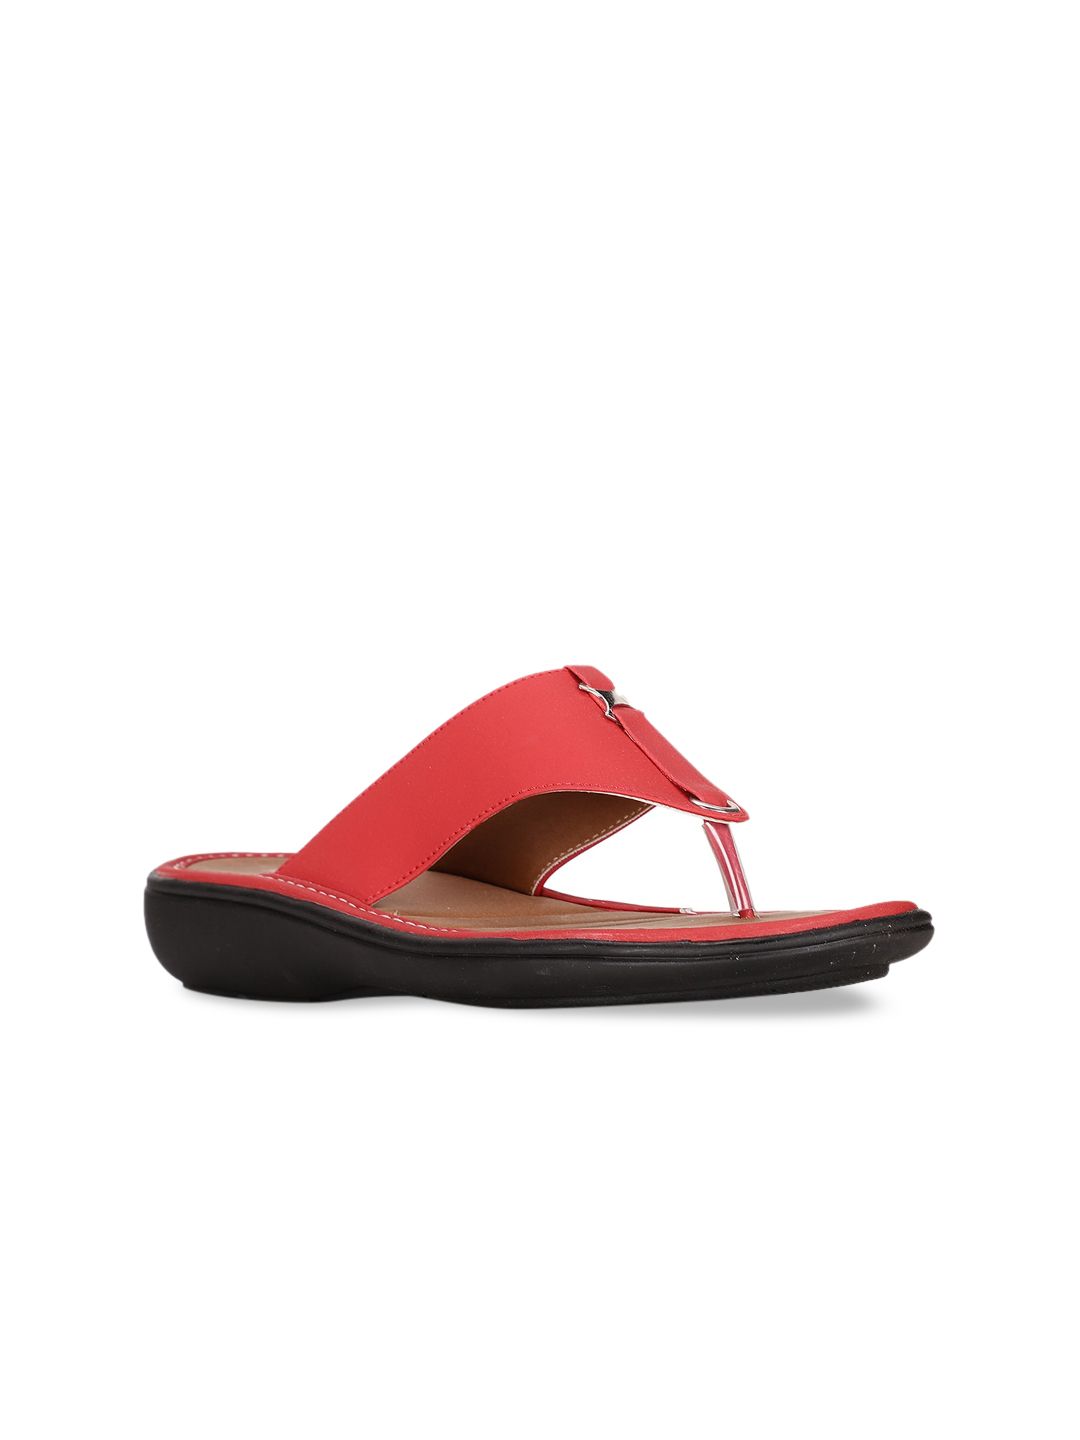 Bata Women Red Solid T-Strap Flats Price in India